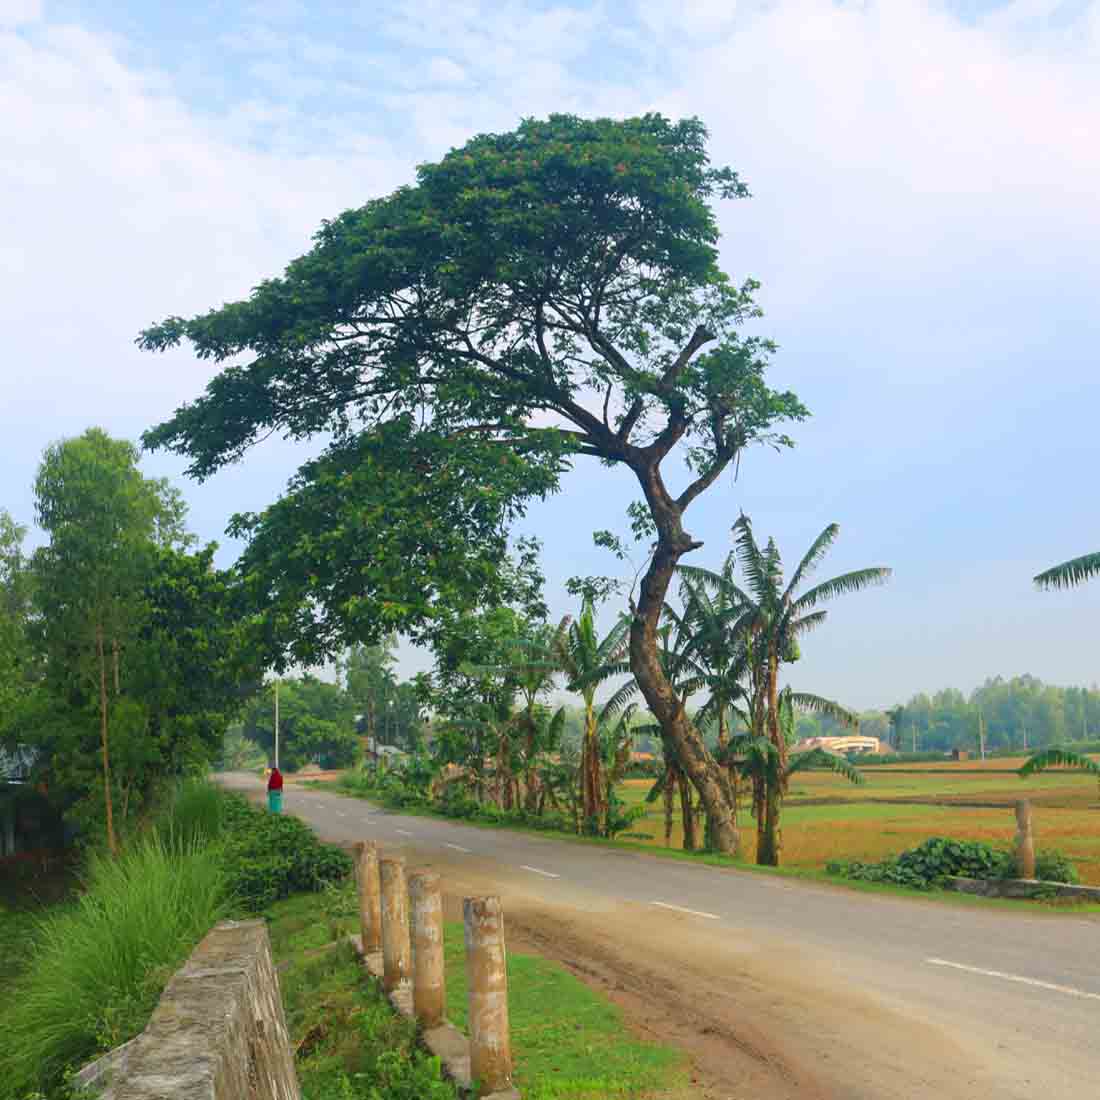 Ghar Tree village people & roads stock photos in Bangladesh preview image.